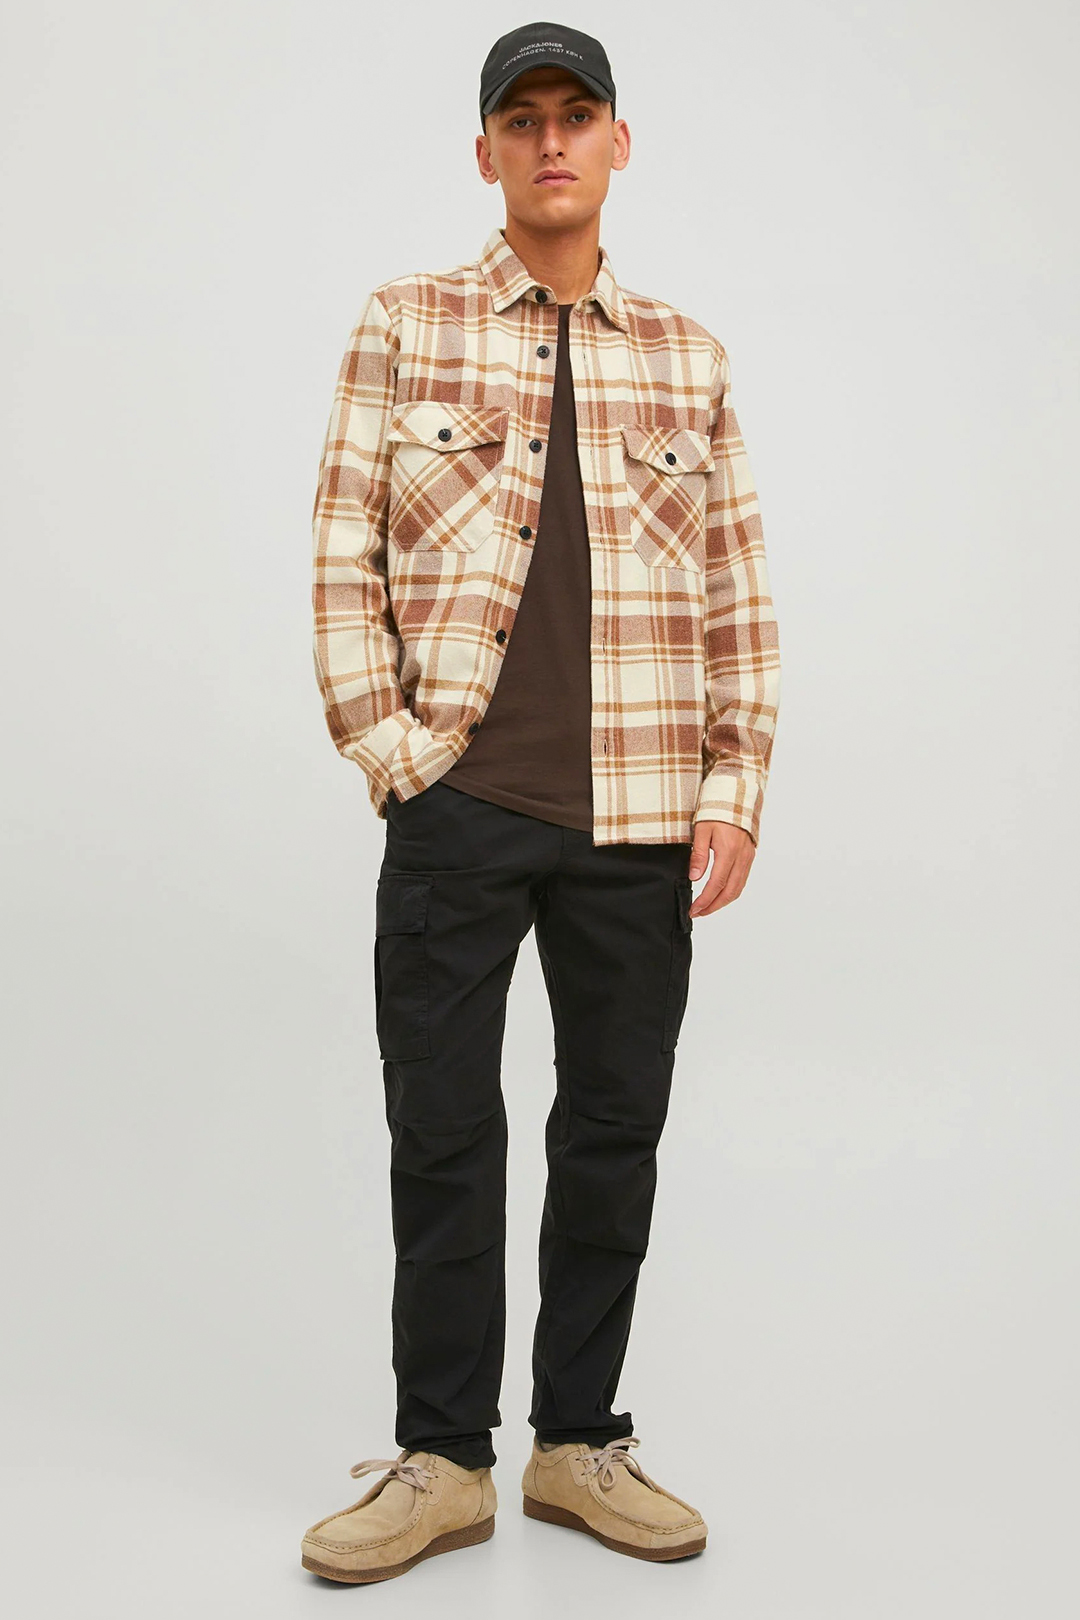 Brown plaid shirt jacket, brown t-shirt, black cargo pants, and light brown desert boots outfit